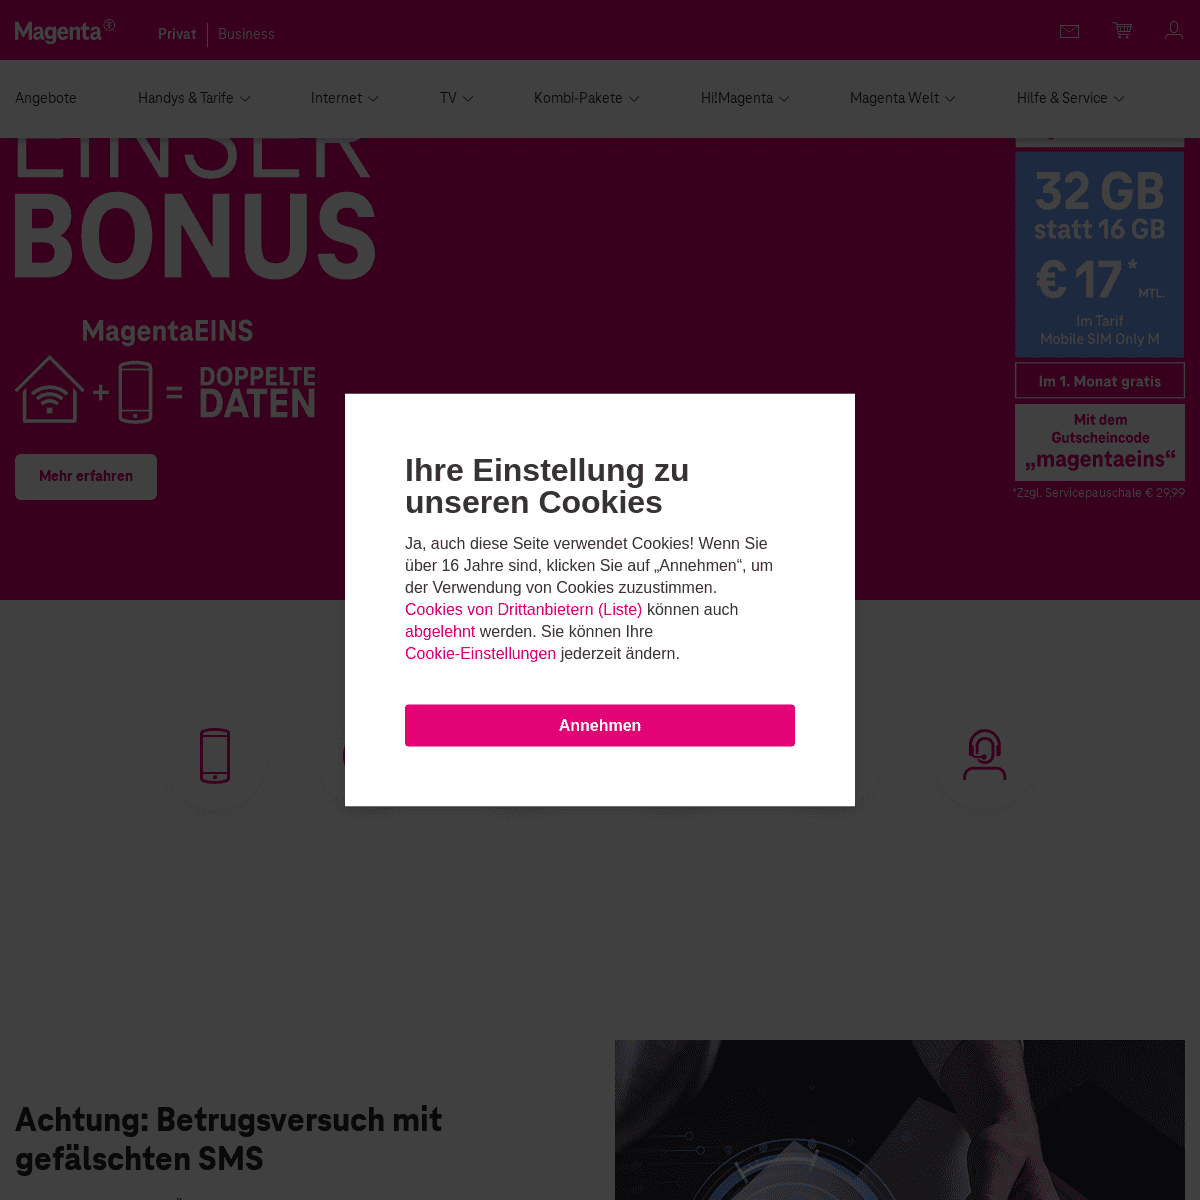 A complete backup of https://magenta.at